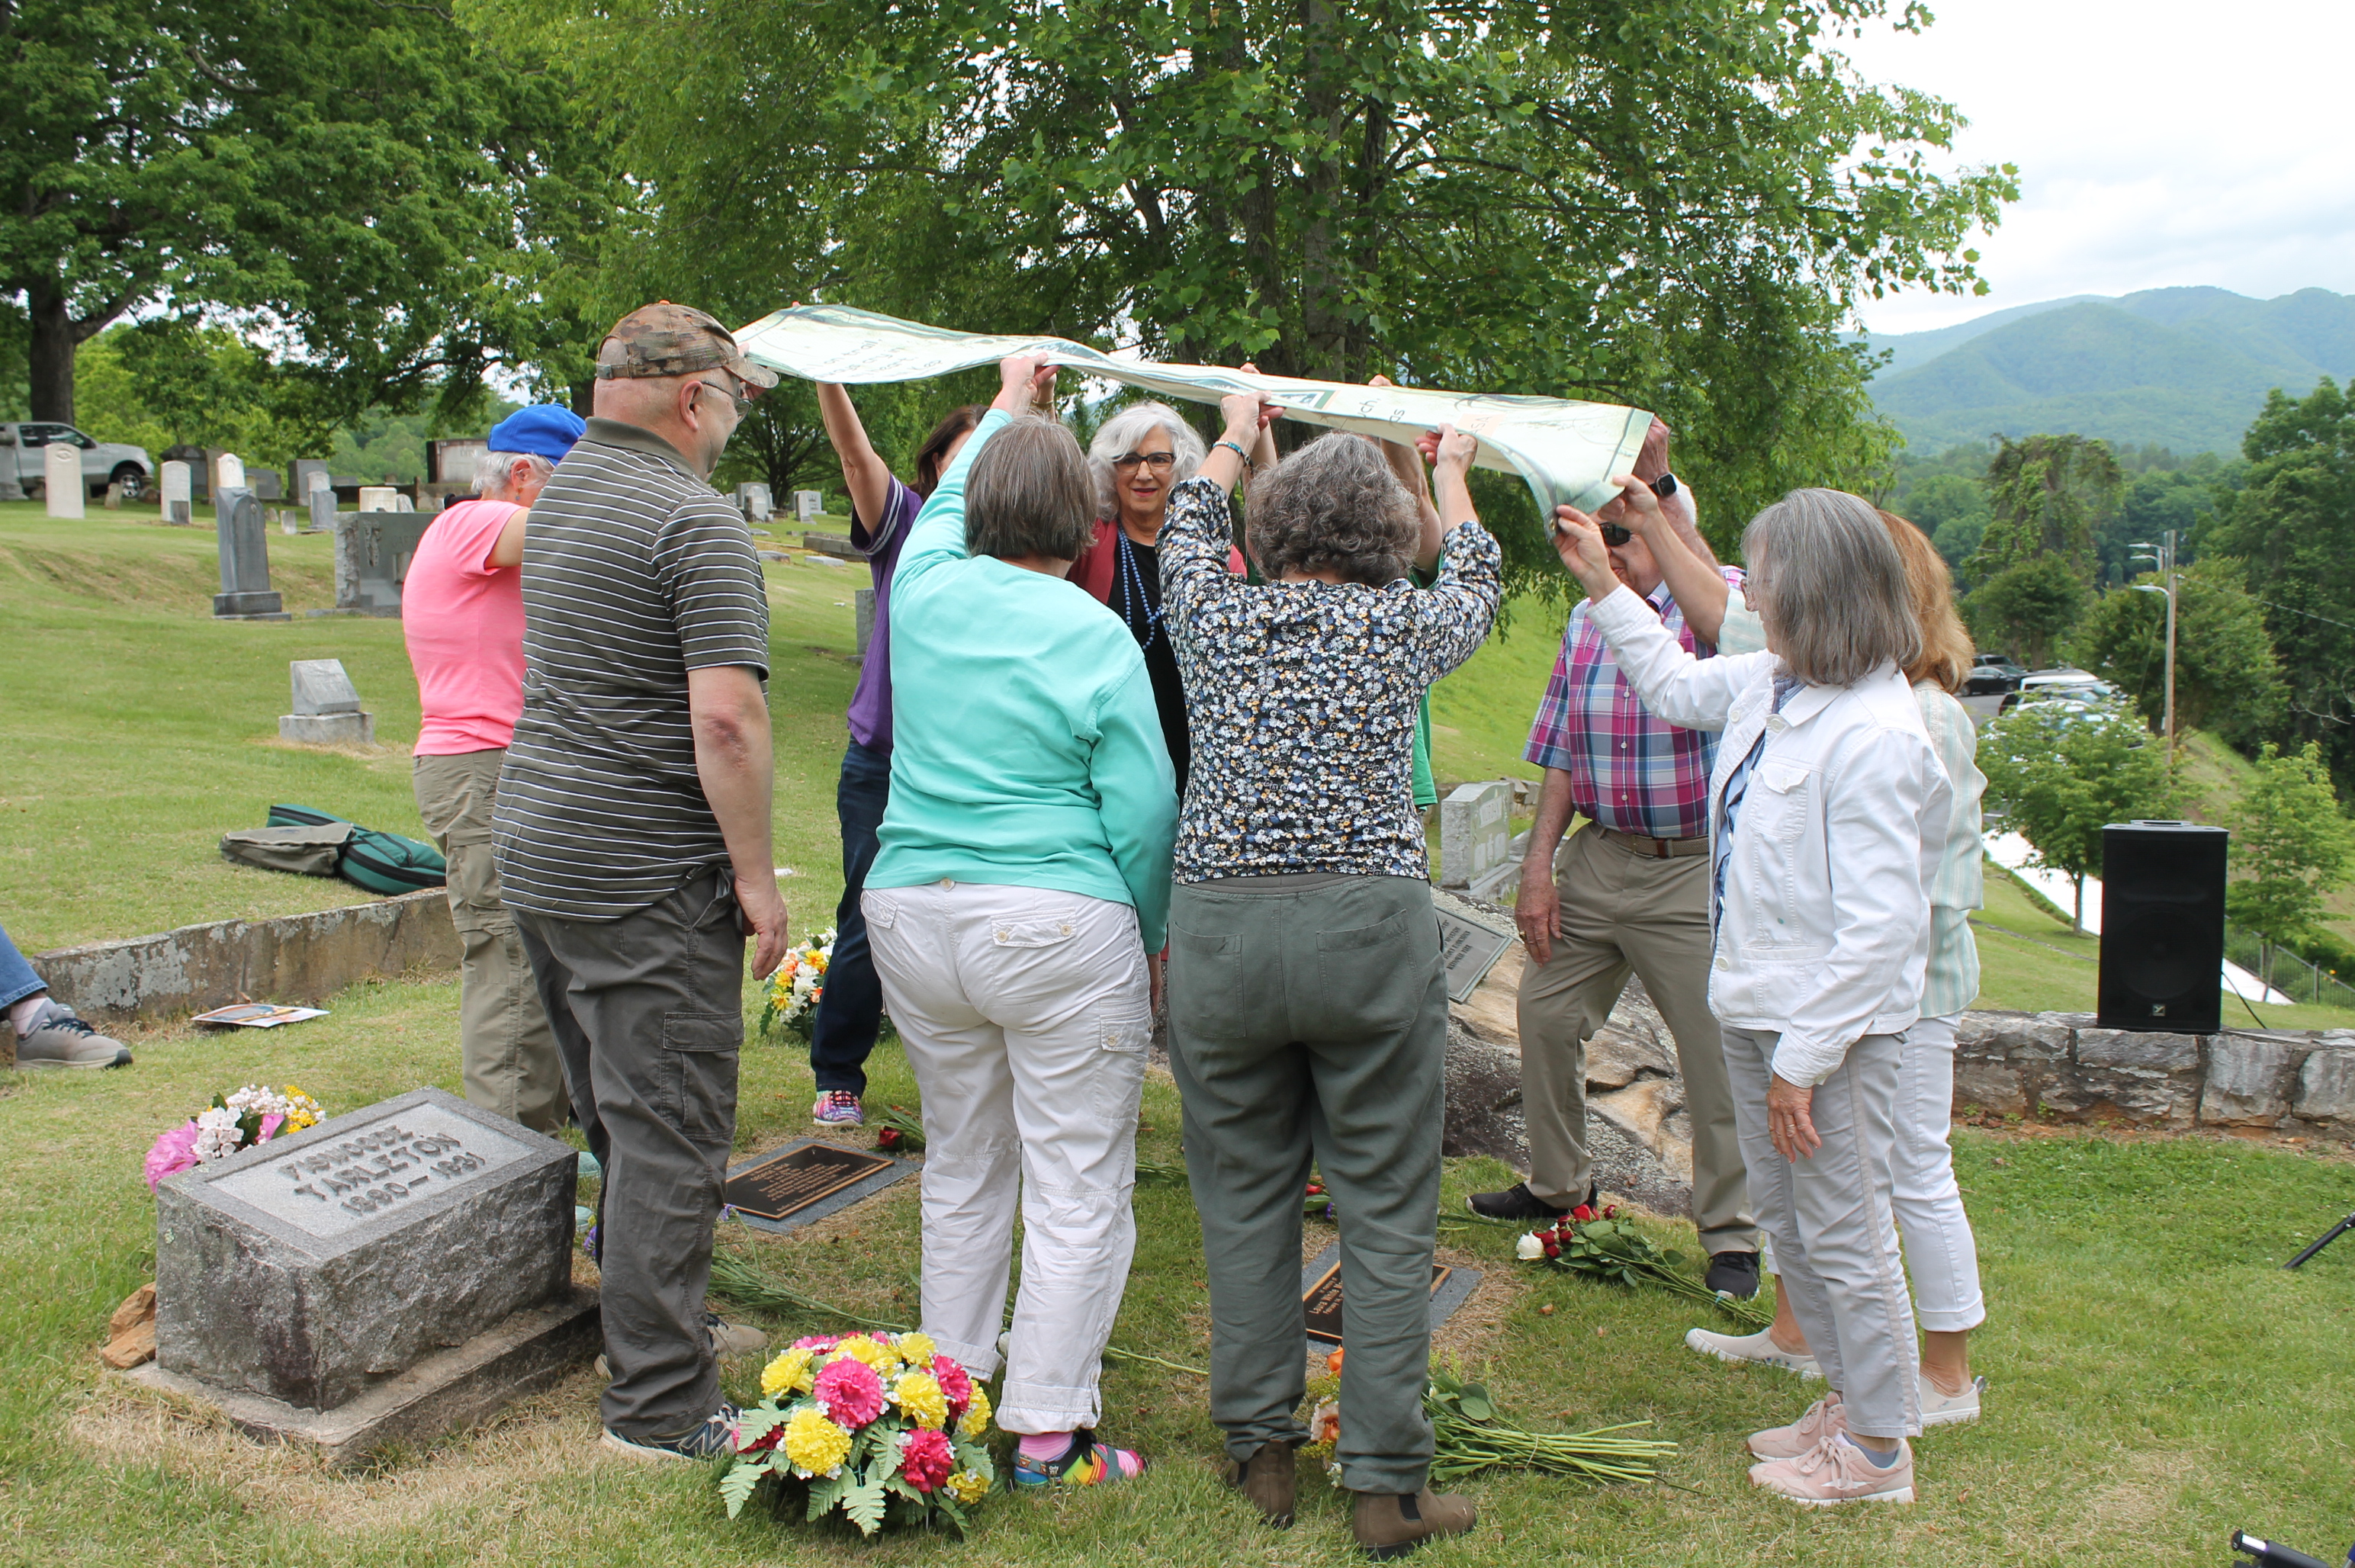 Descendants of author and nature activist Horace Kephart gathered this weekend in town for the Kephart Days ceremony, notable this year for the unveiling of grave markers for George Masa and Laura Kephart, as well as for being the 100th birthday of Barbara Kephart Crane, Horace’s granddaughter.